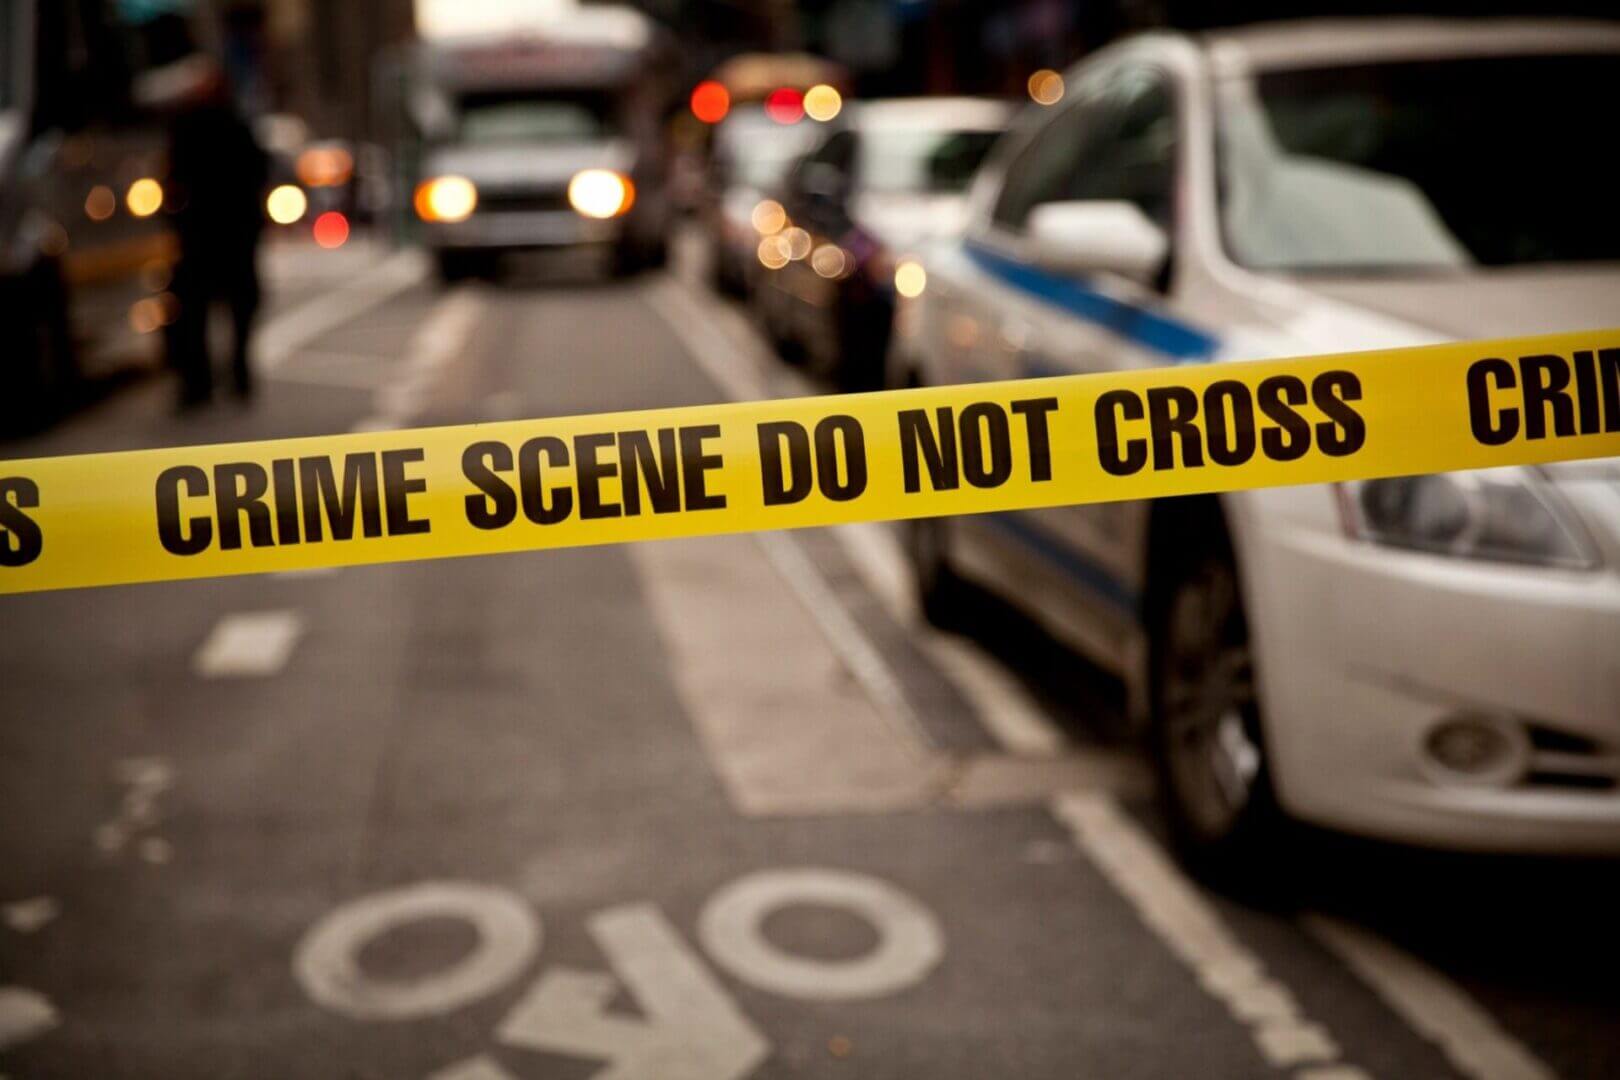 A police tape is shown on the side of a road.